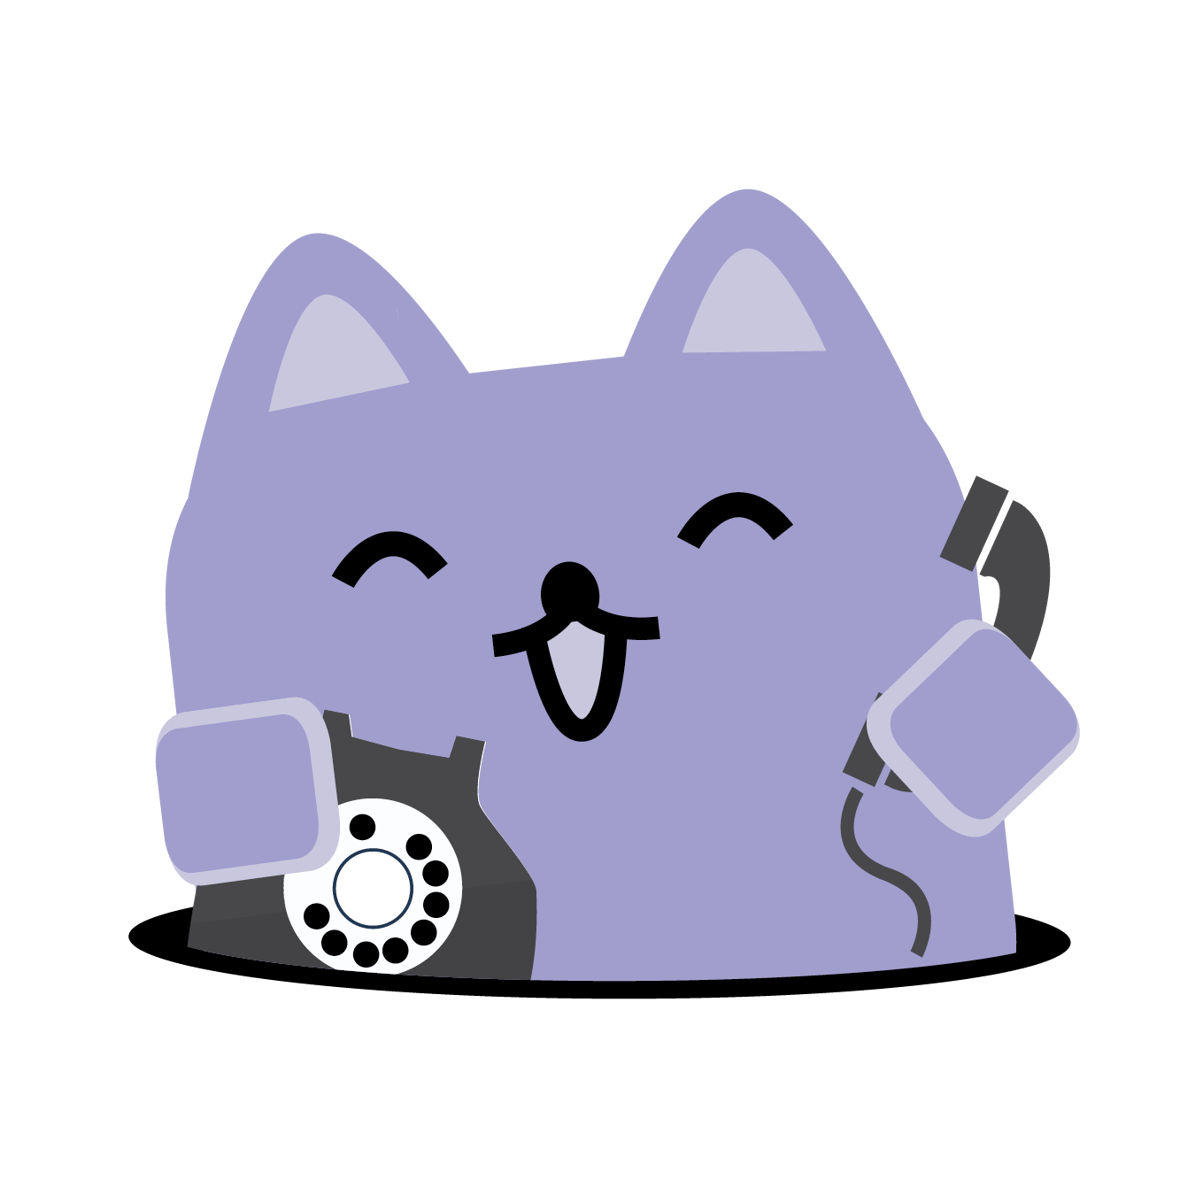 Broadcat, with a phone.